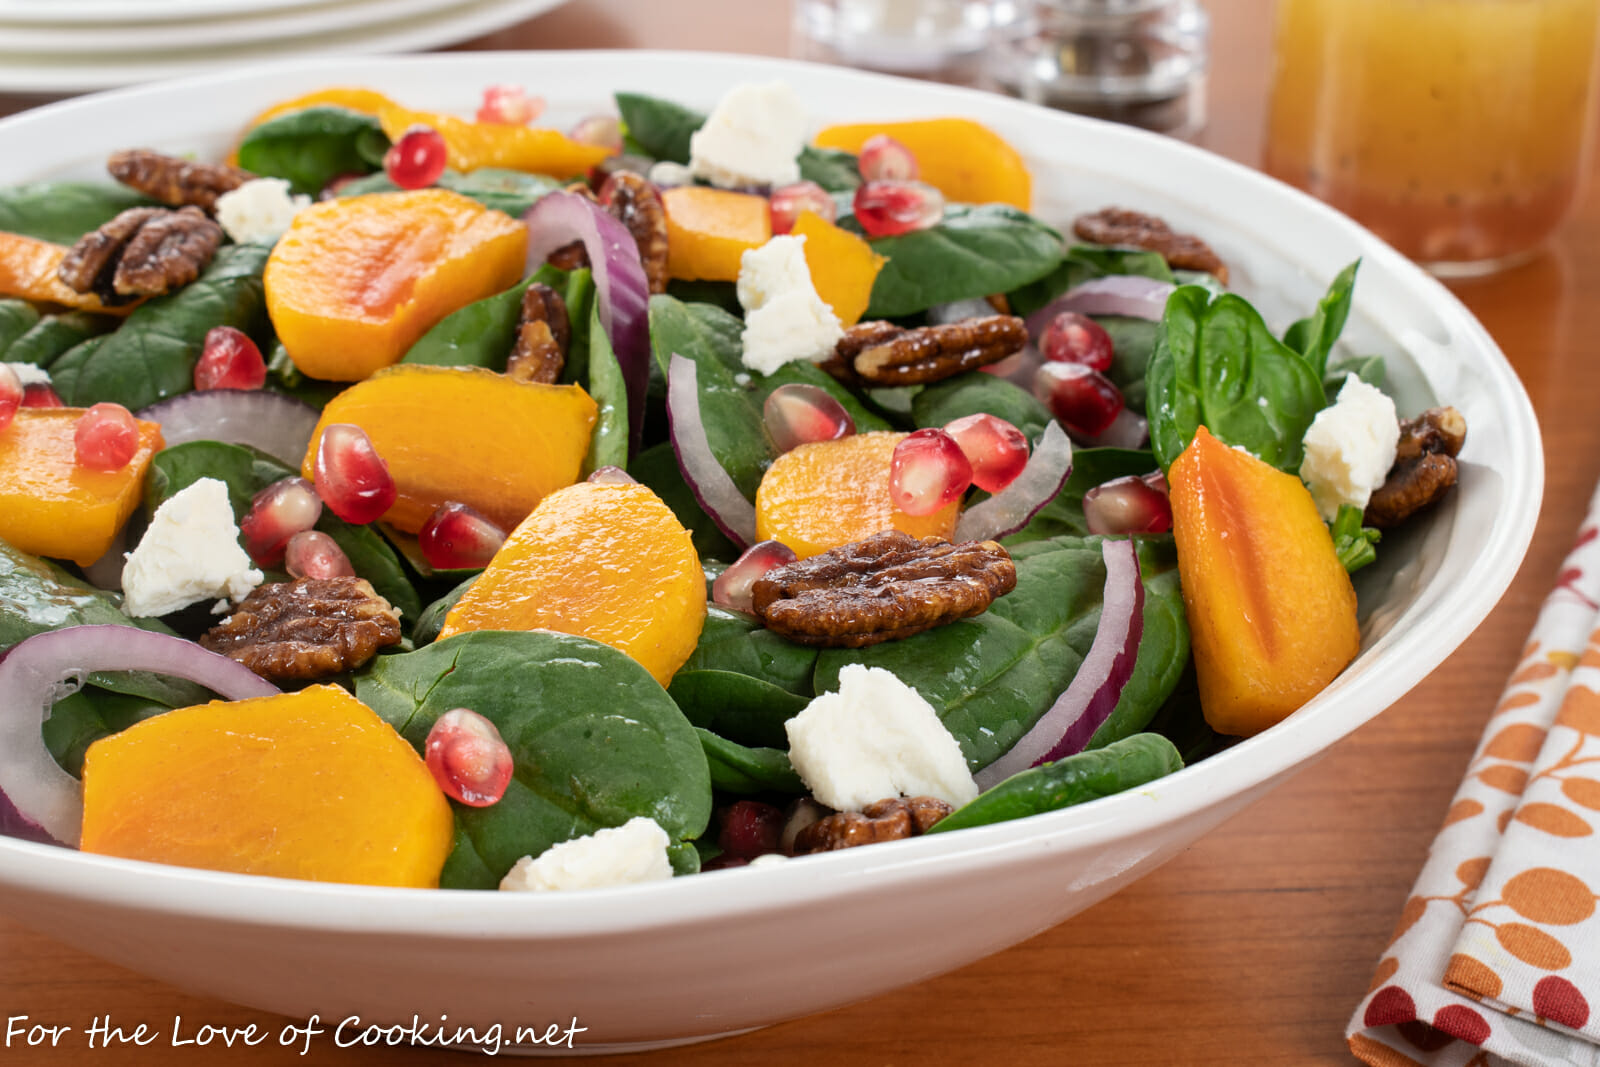 Spinach Salad with Persimmons, Pomegranate Seeds and Candied Pecans